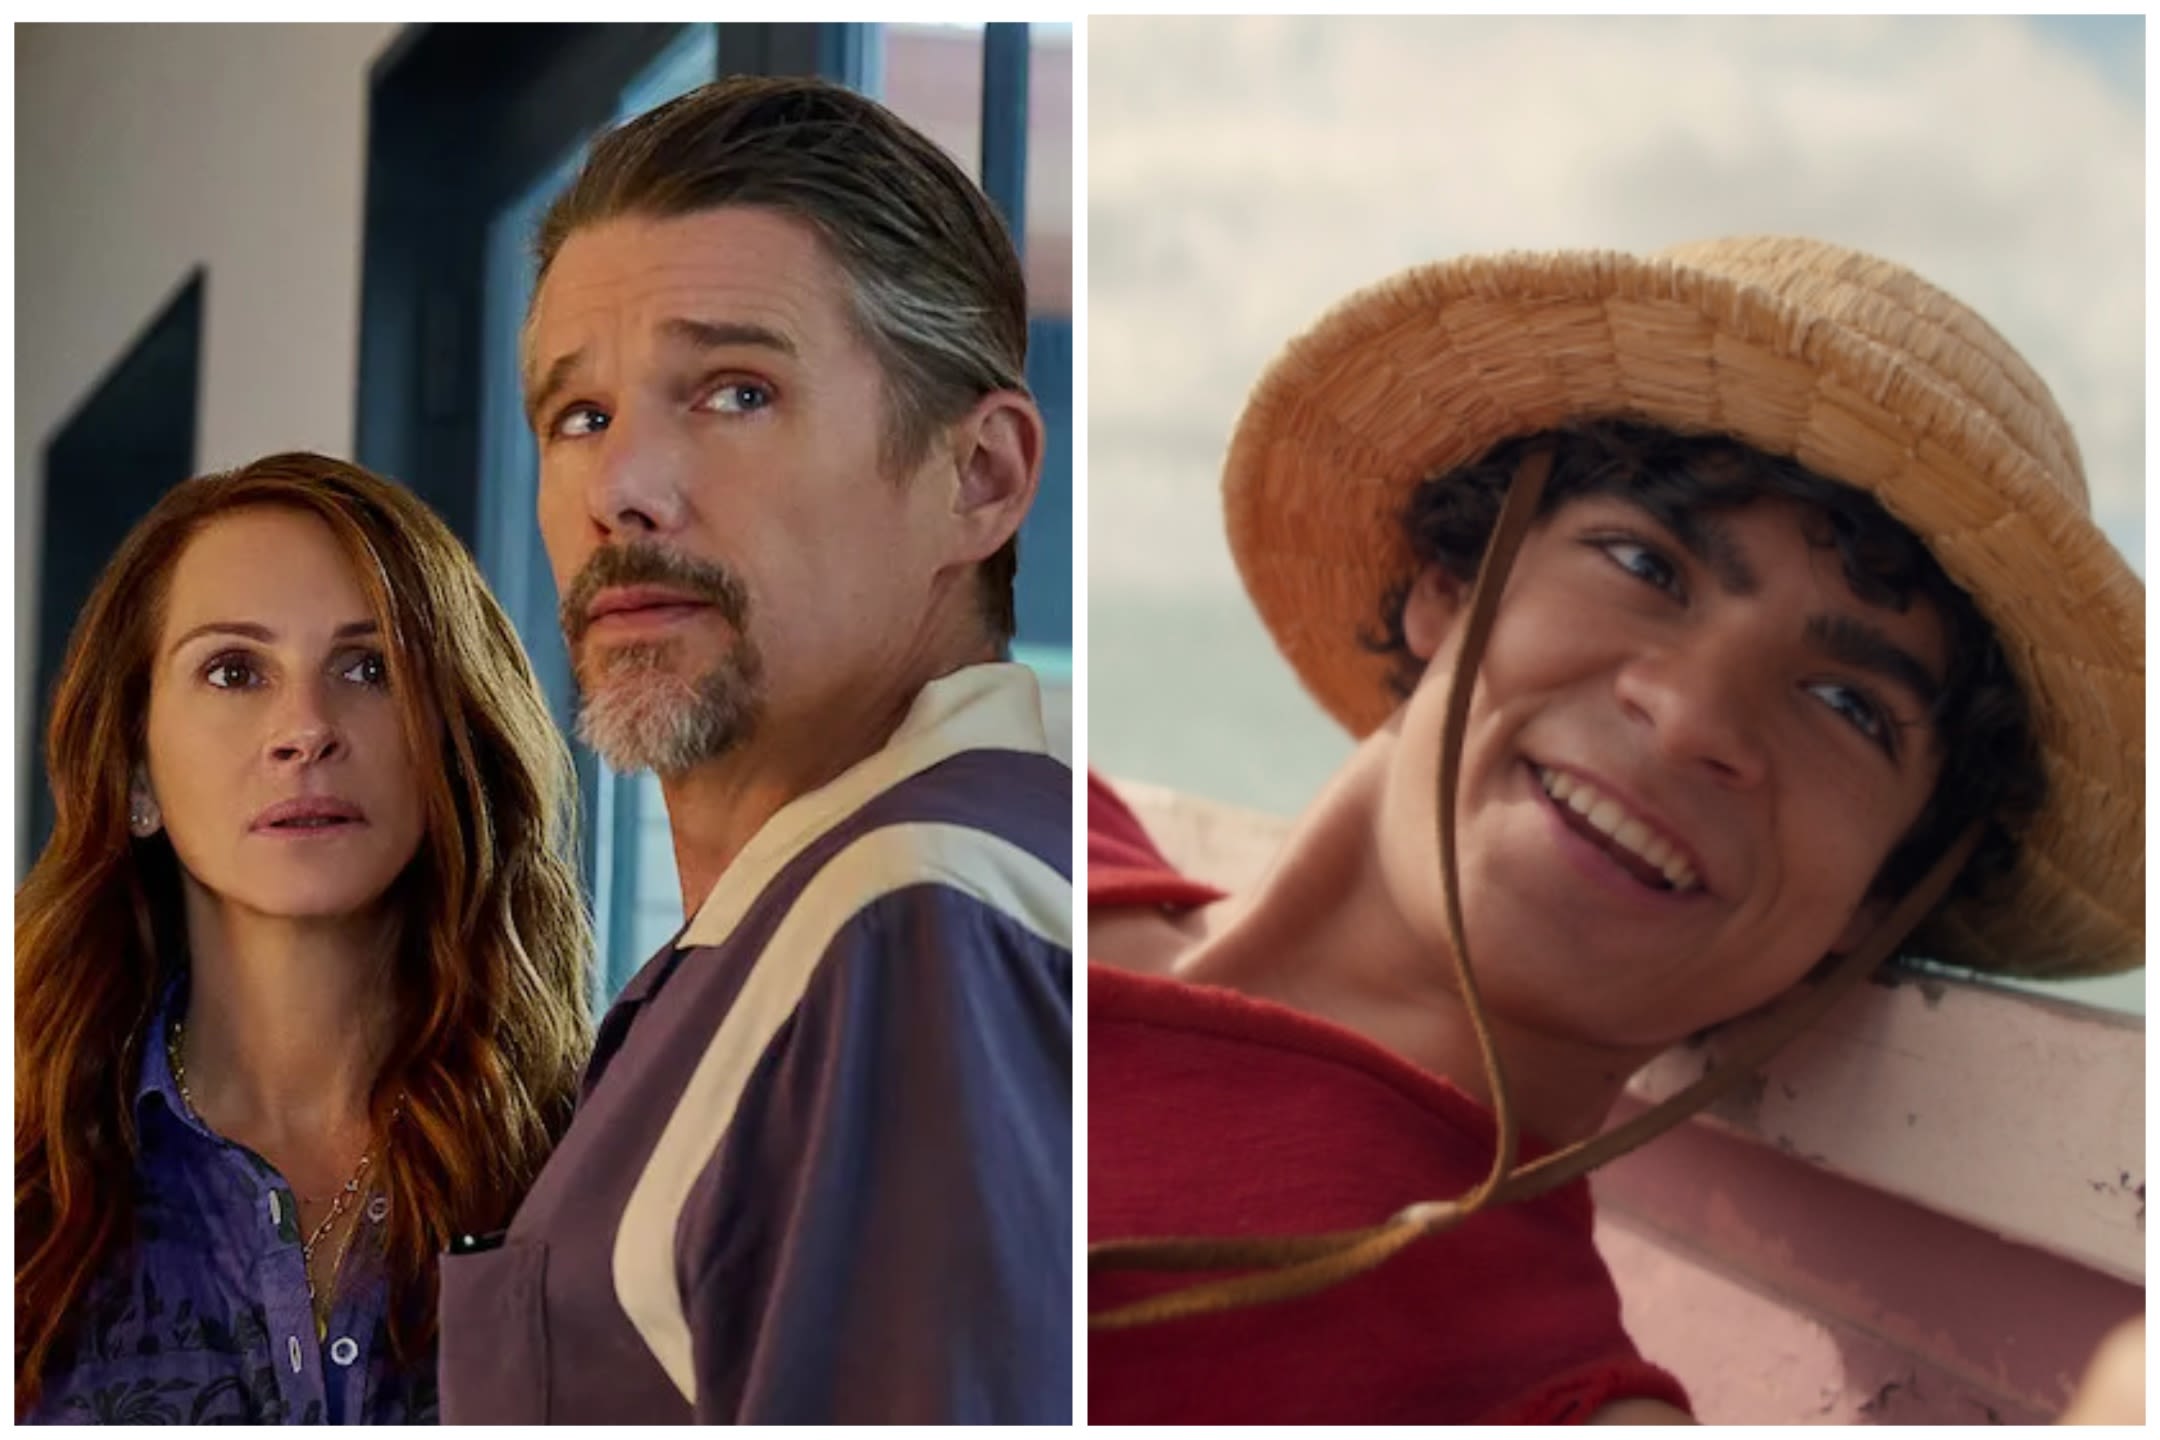 ‘Leave the World Behind’ Tops All Netflix Viewing...With 121 Million Views, ‘One Piece’ Leads TV With 71.6 Million Views